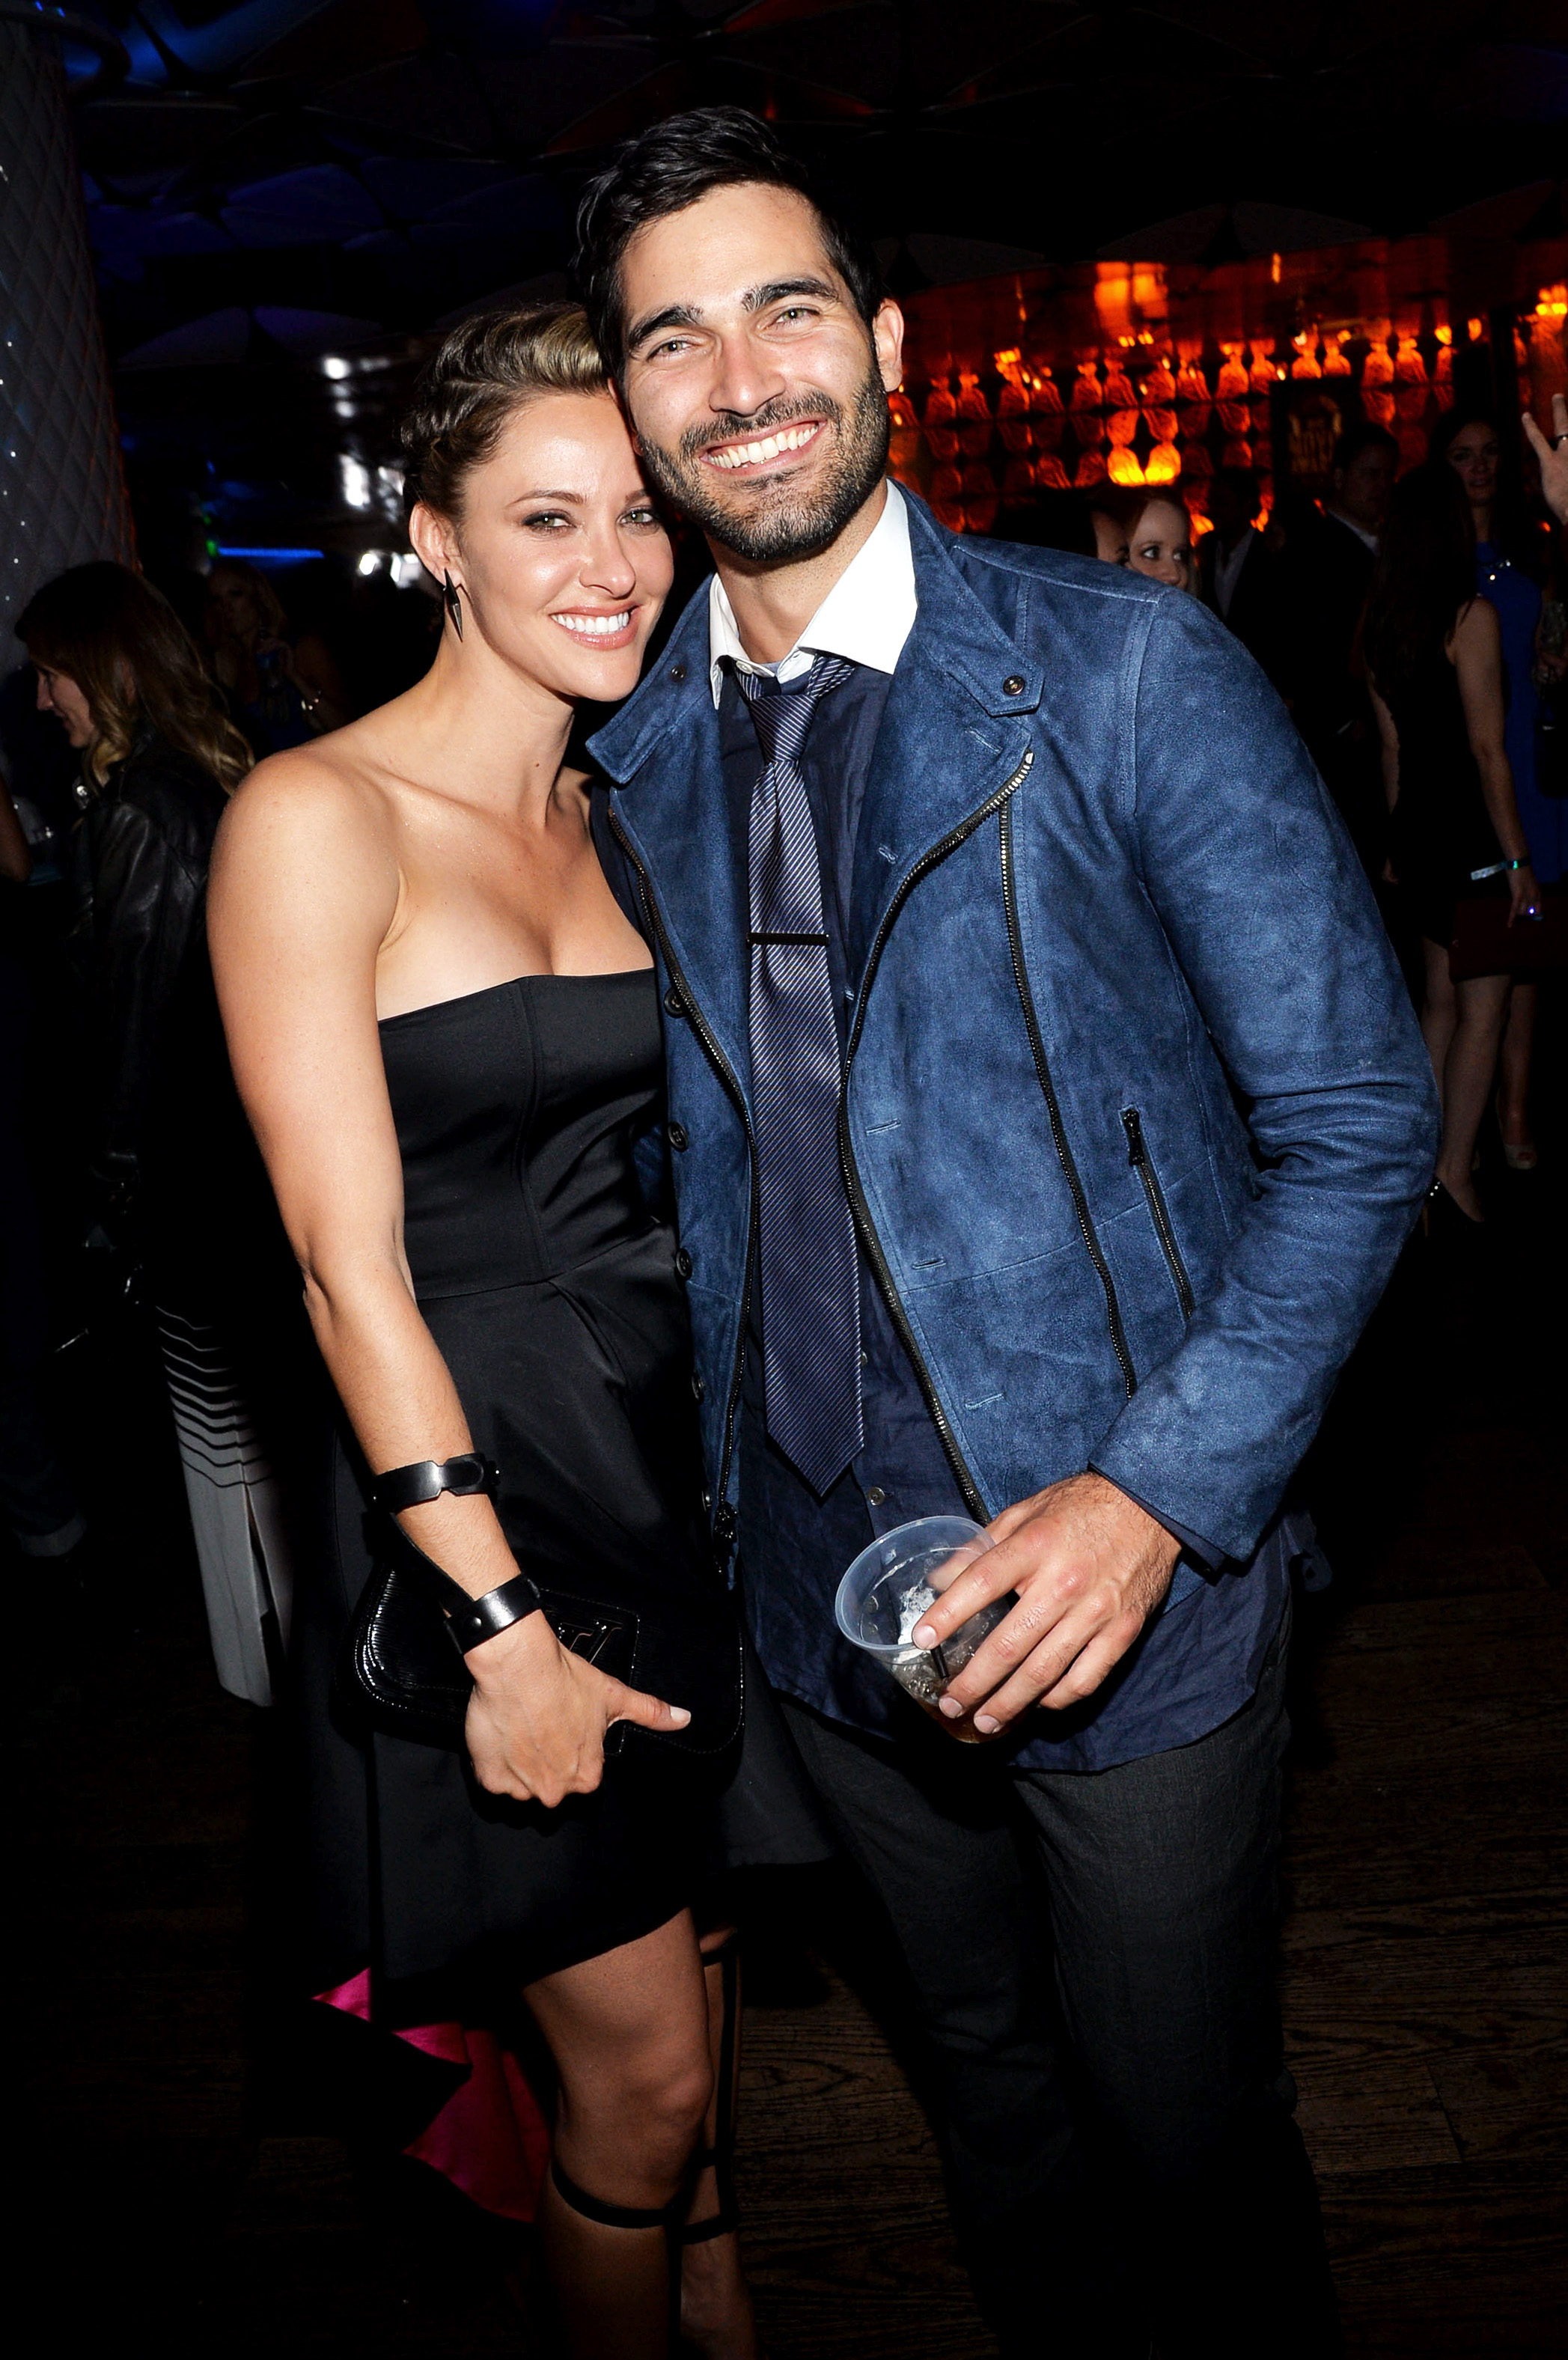 Jill Wagner and actor Tyler Hoechlin during the after party for the 2014 MTV Movie Awards at Nokia Theatre L.A. on April 13, 2014, in Los Angeles, California. | Source: Getty Images